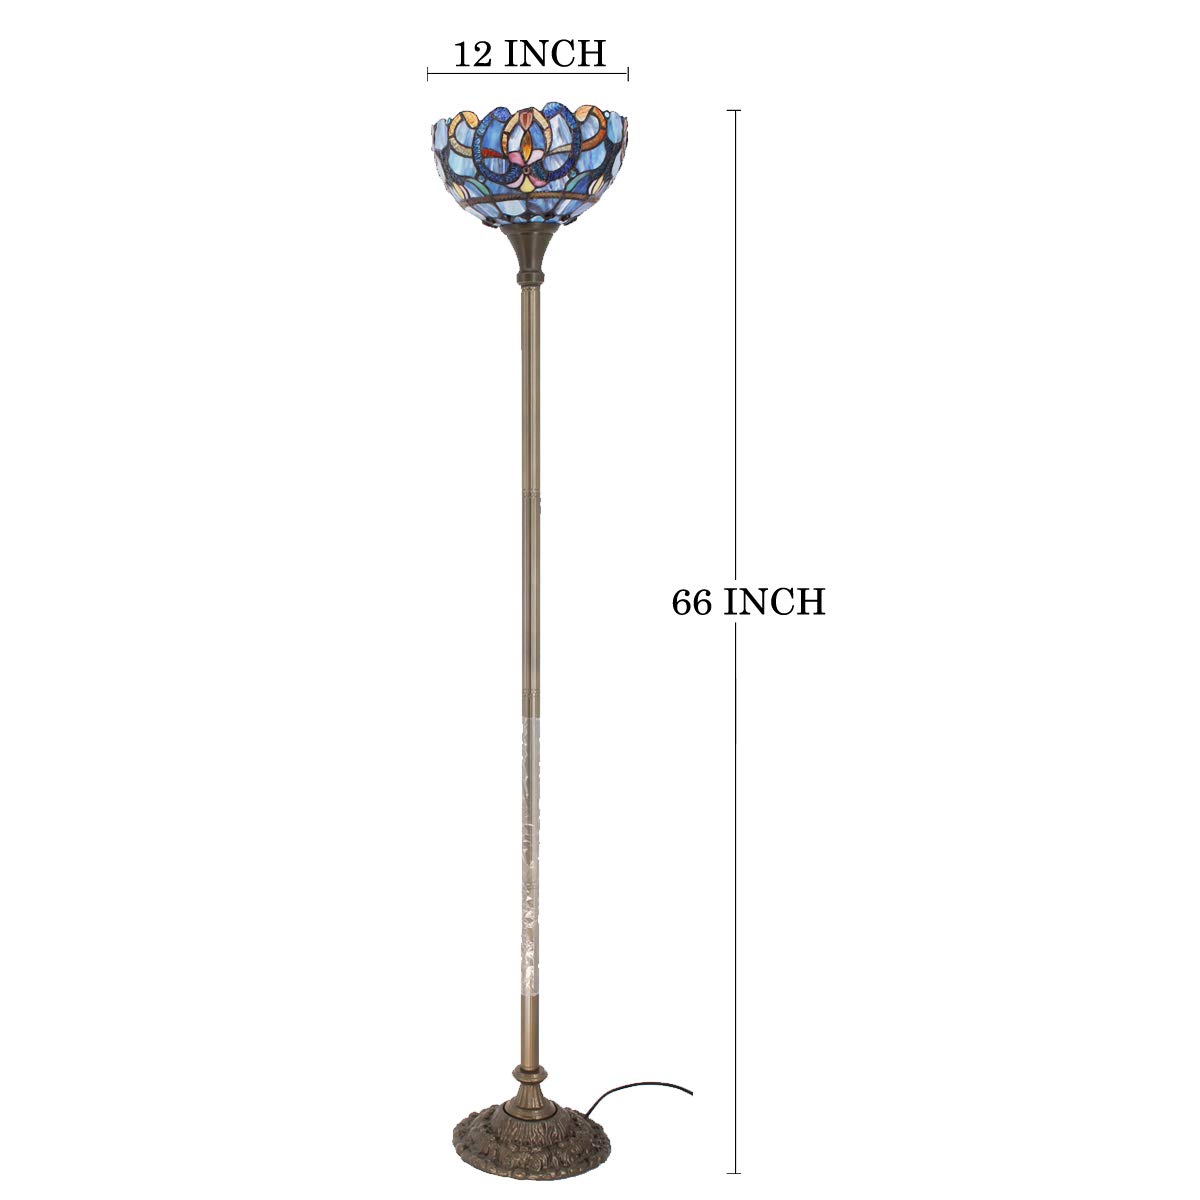 WERFACTORY Tiffany Floor Lamp Blue Purple Cloud Stained Glass Light 12X12X66 Inches Pole Torchiere Standing Corner Torch Uplight Decor Bedroom Living Room Home Office S558 Series (Blue Purple)